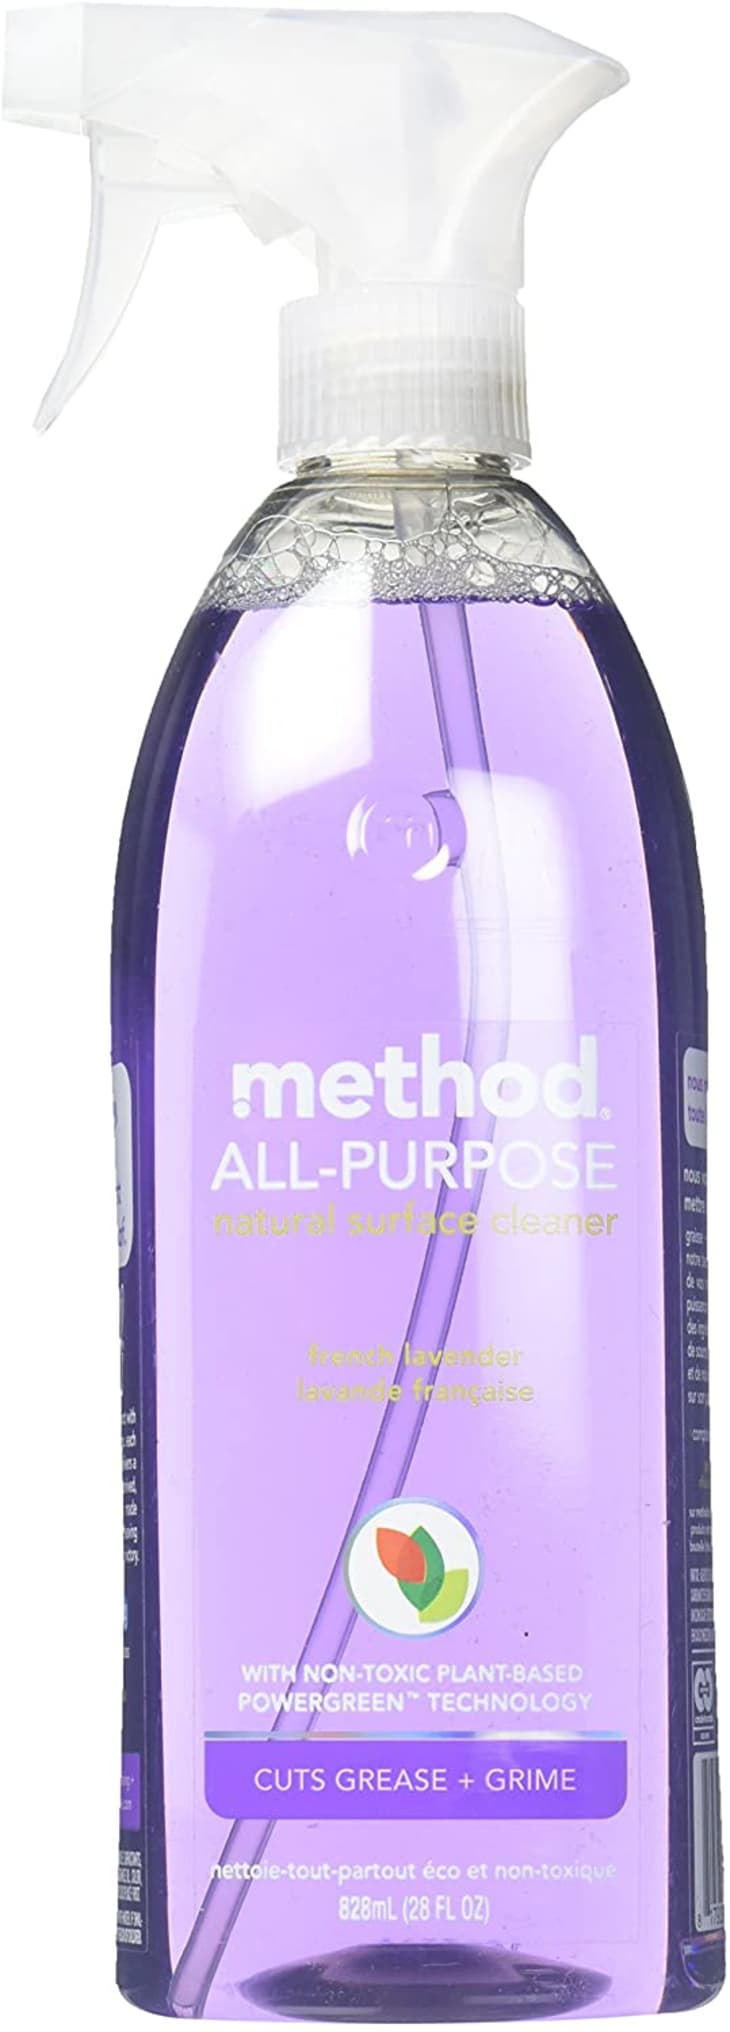 Product Image: Method All-Purpose Cleaner Spray, French Lavender